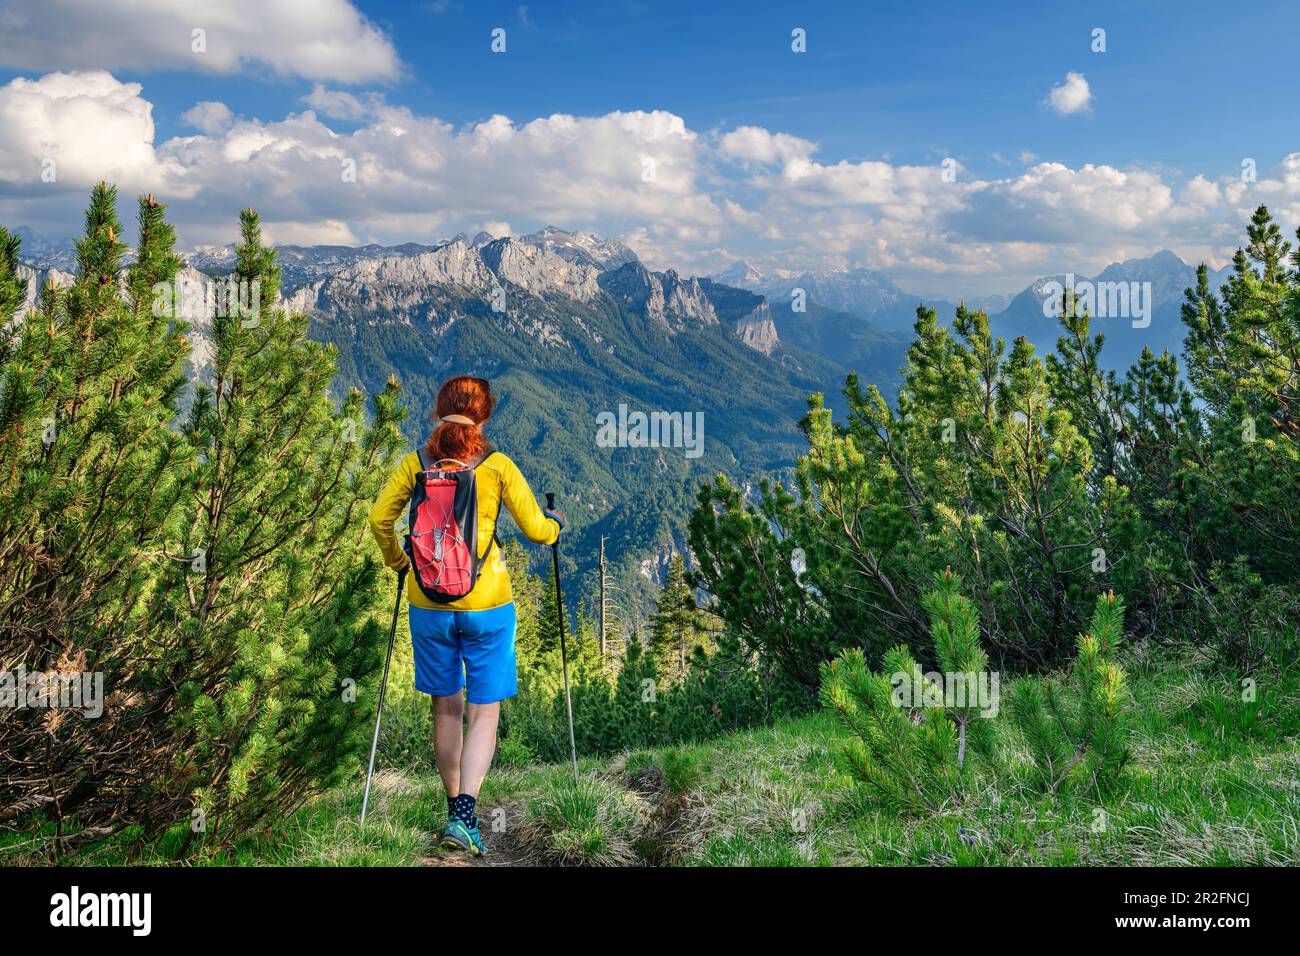 Woman hiking goes through Latschen, Reiteralm in the Berchtesgaden Alps in the background, from Ristfeuchthorn, Chiemgau Alps, Chiemgau, Upper Bavaria Stock Photo